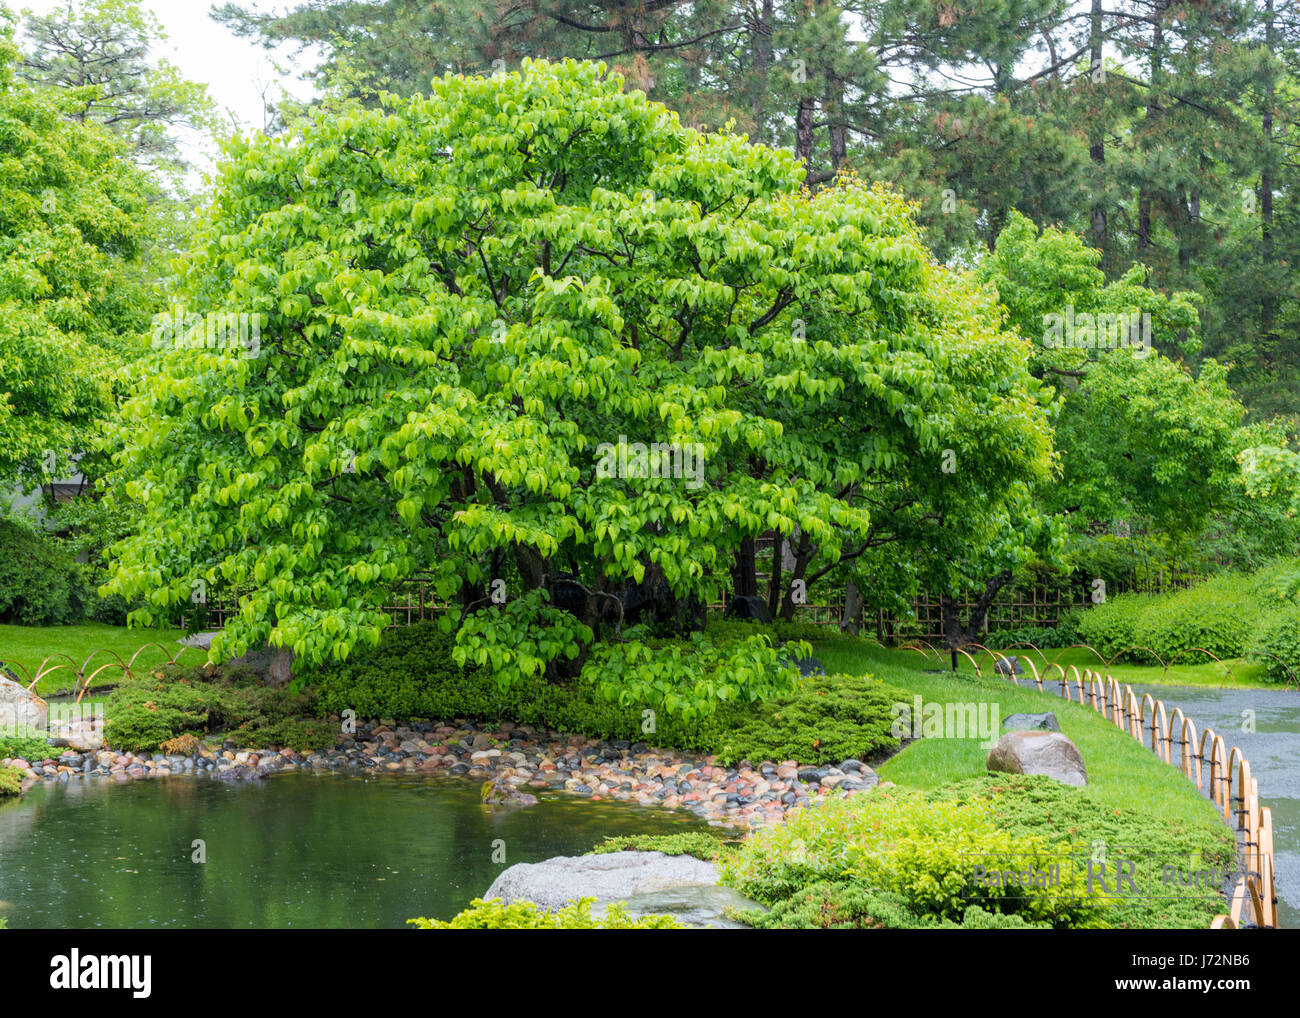 A decidious tree stands next to a pond in a Japanese garden Stock Photo